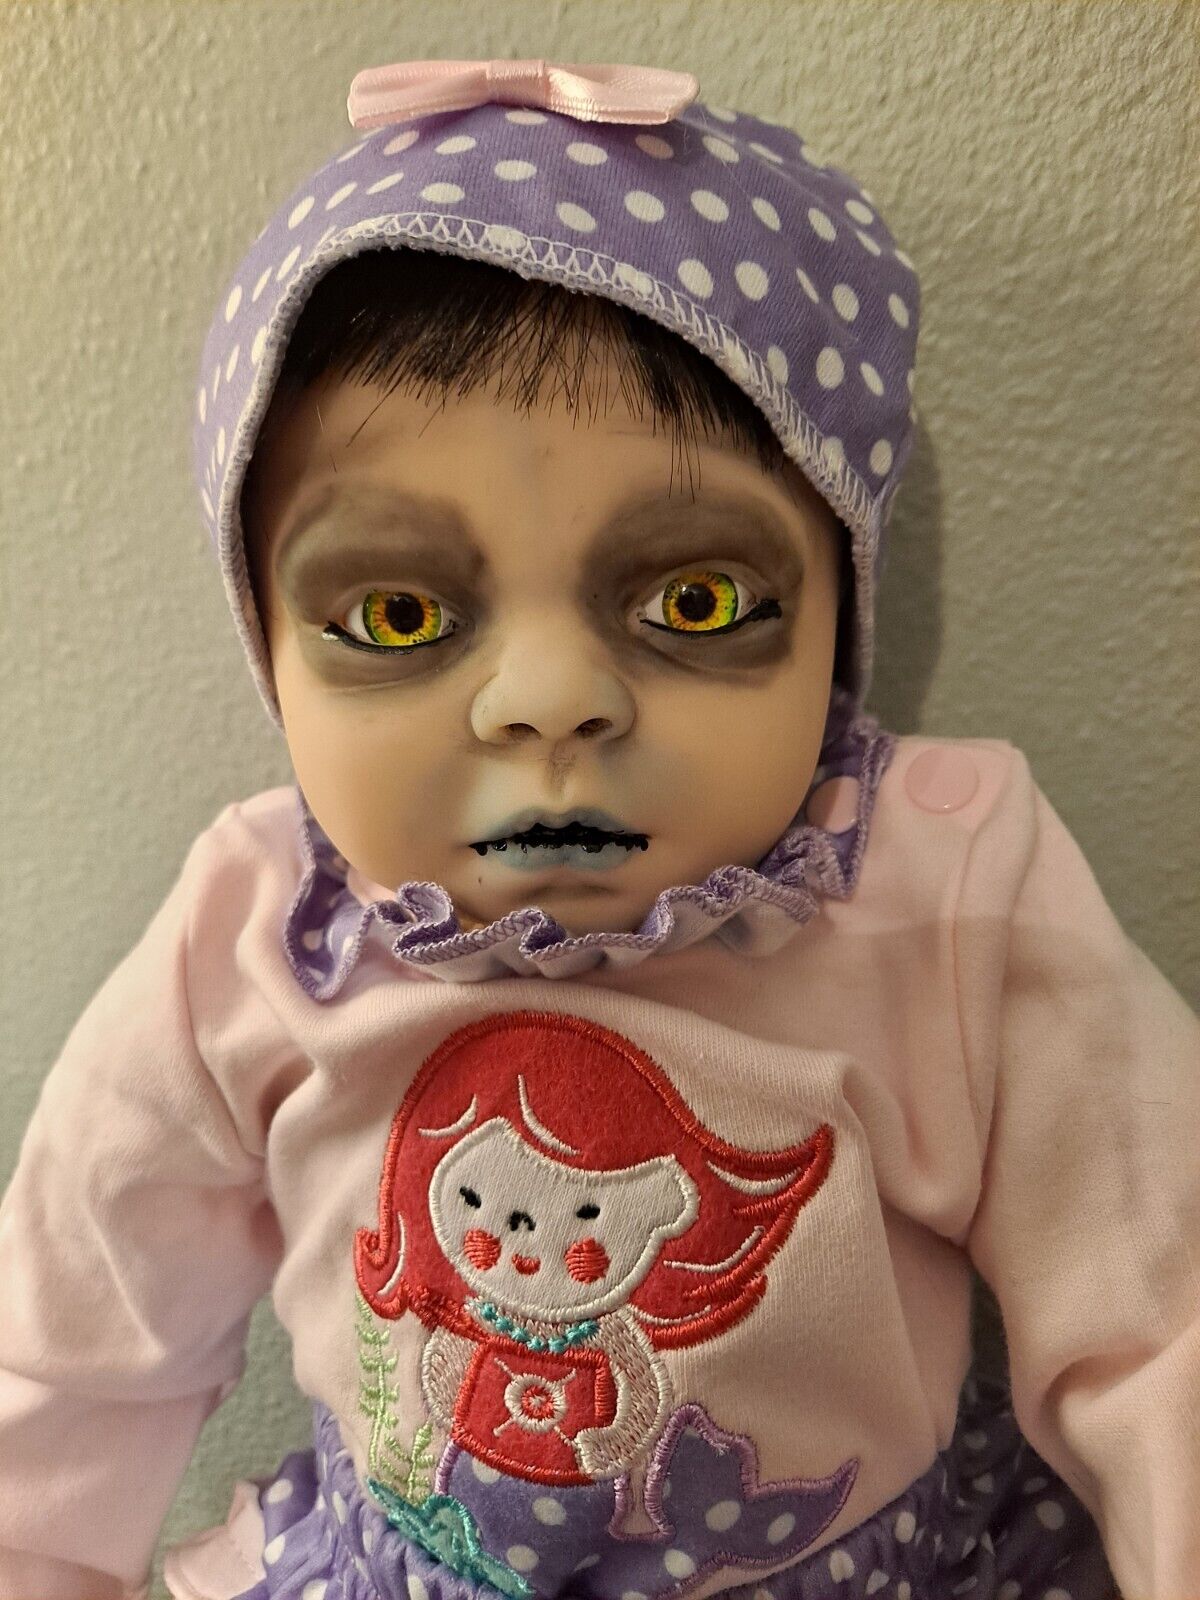 OOAK zombie cuddly baby AND OOAK goth porcelain doll 